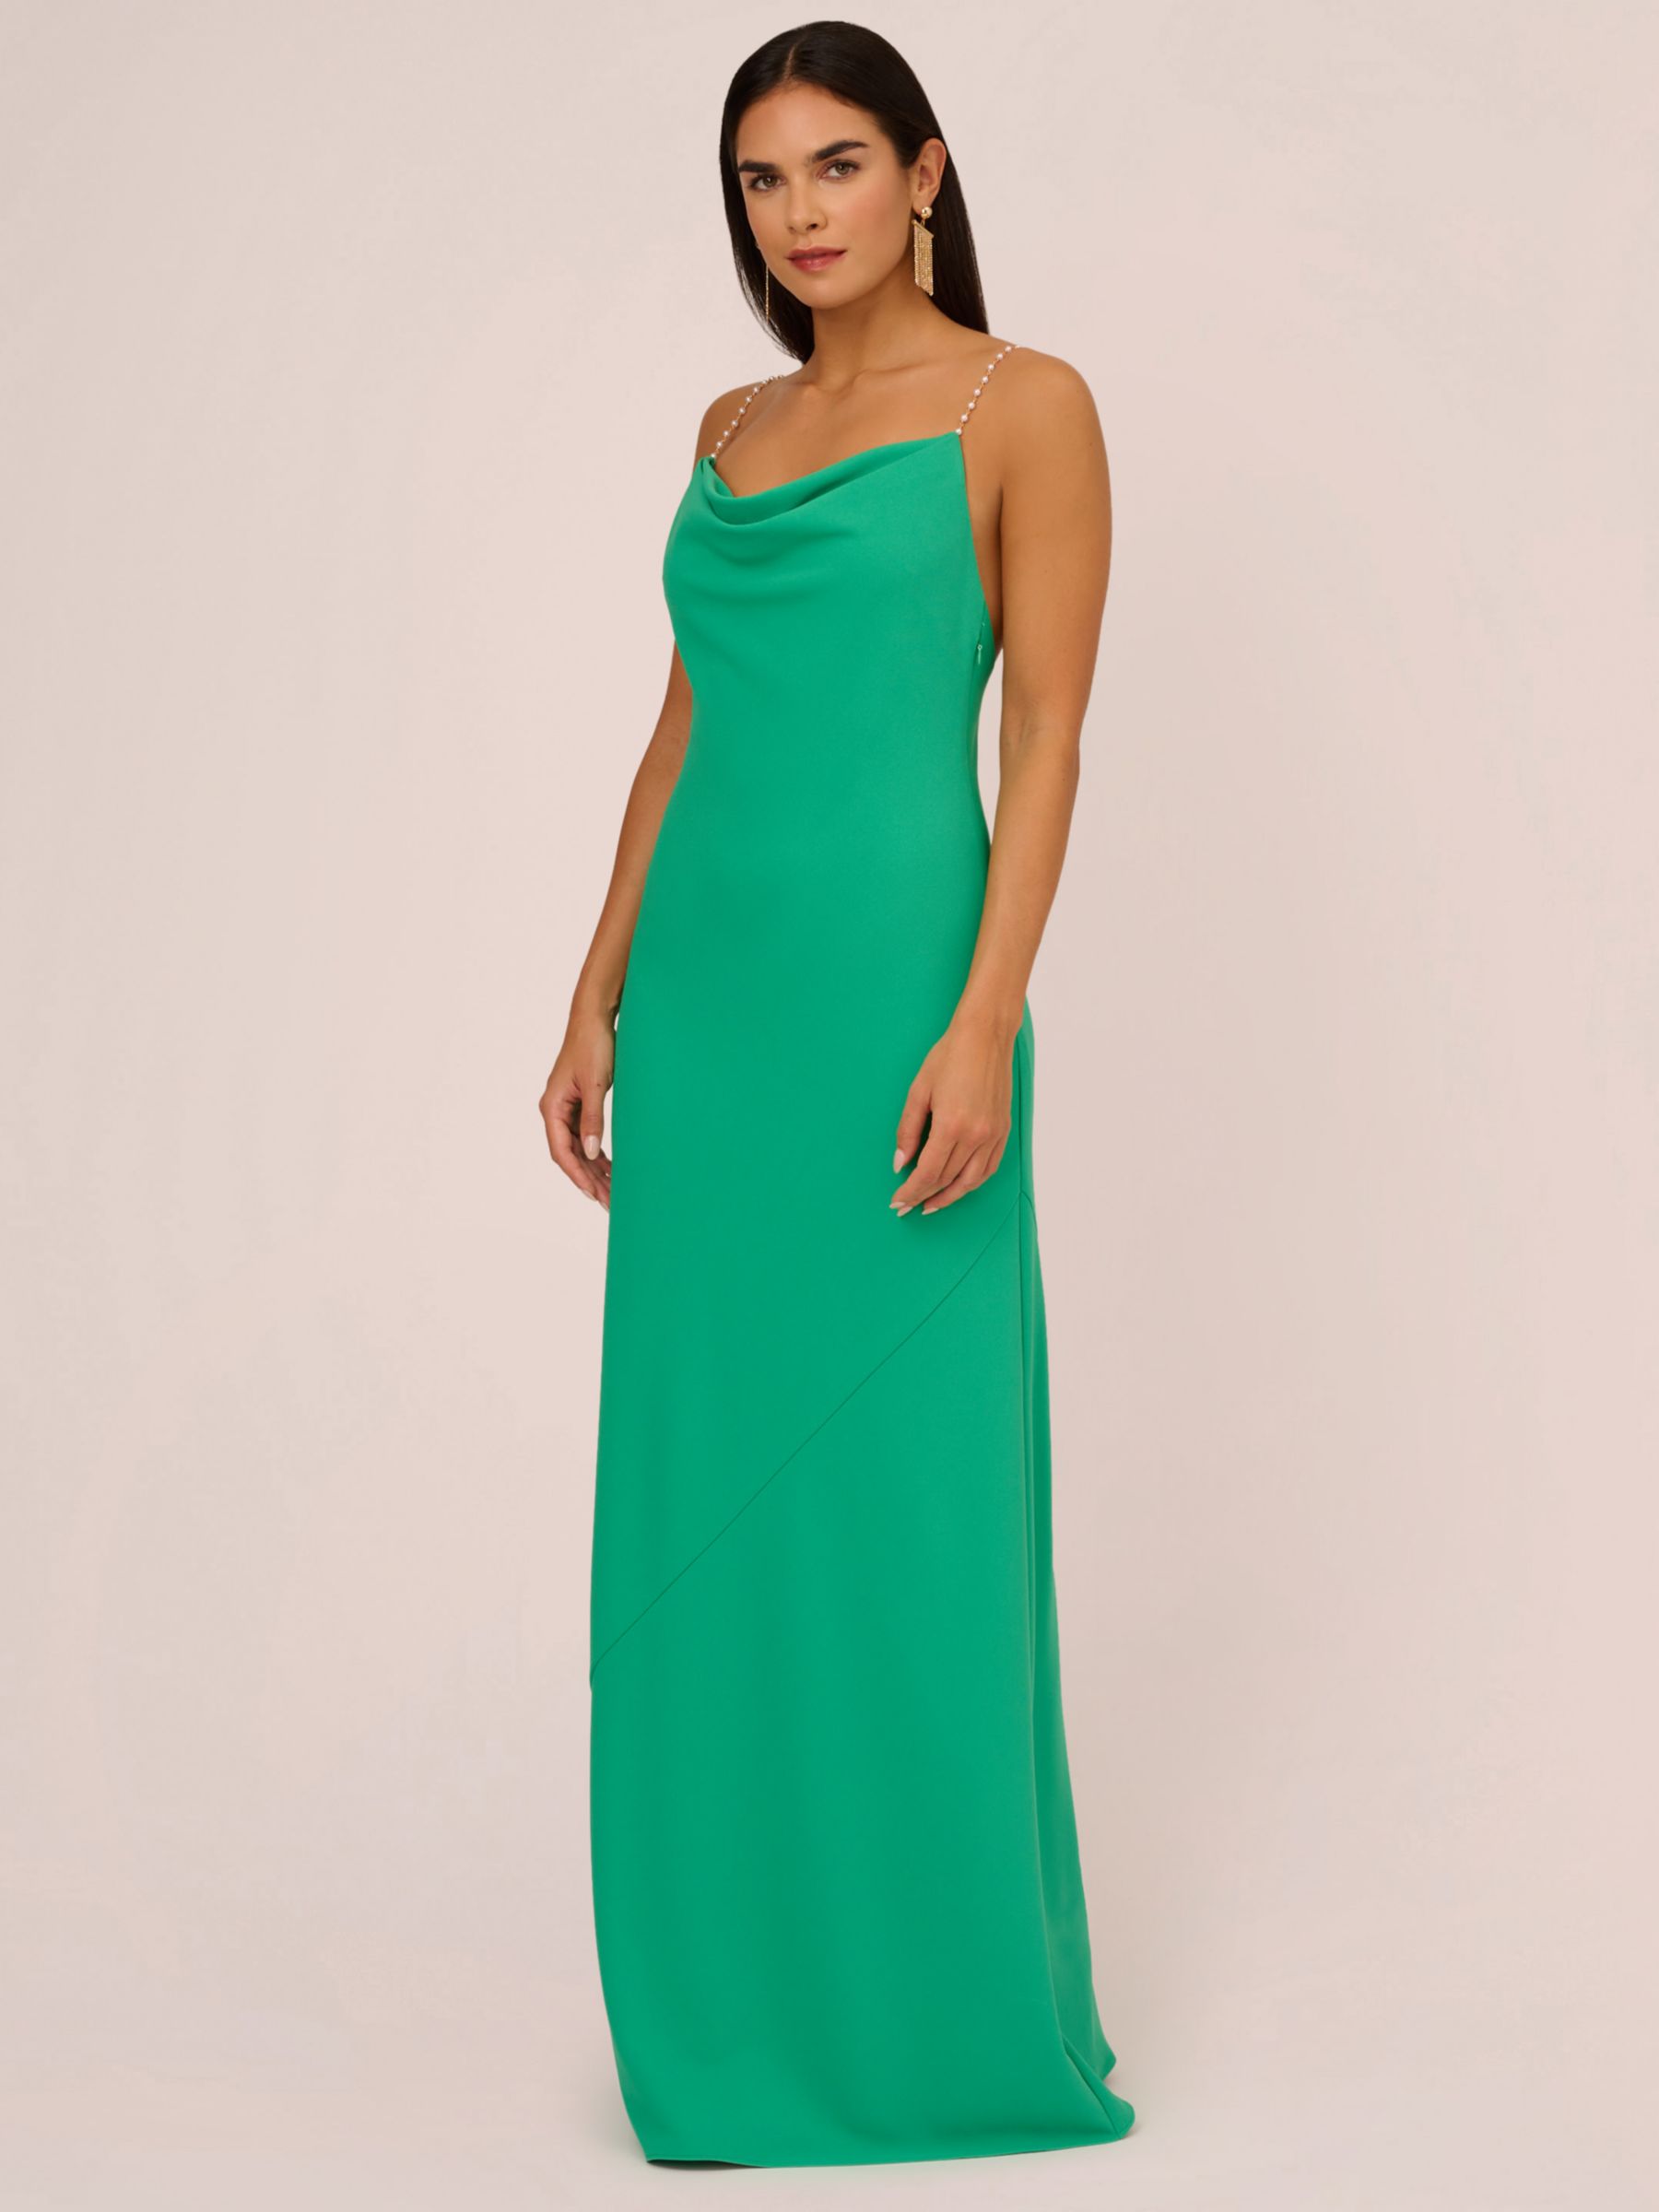 Aidan by Adrianna Papell Knit Crepe Cowl Neck Maxi Dress, Summer Green, 16